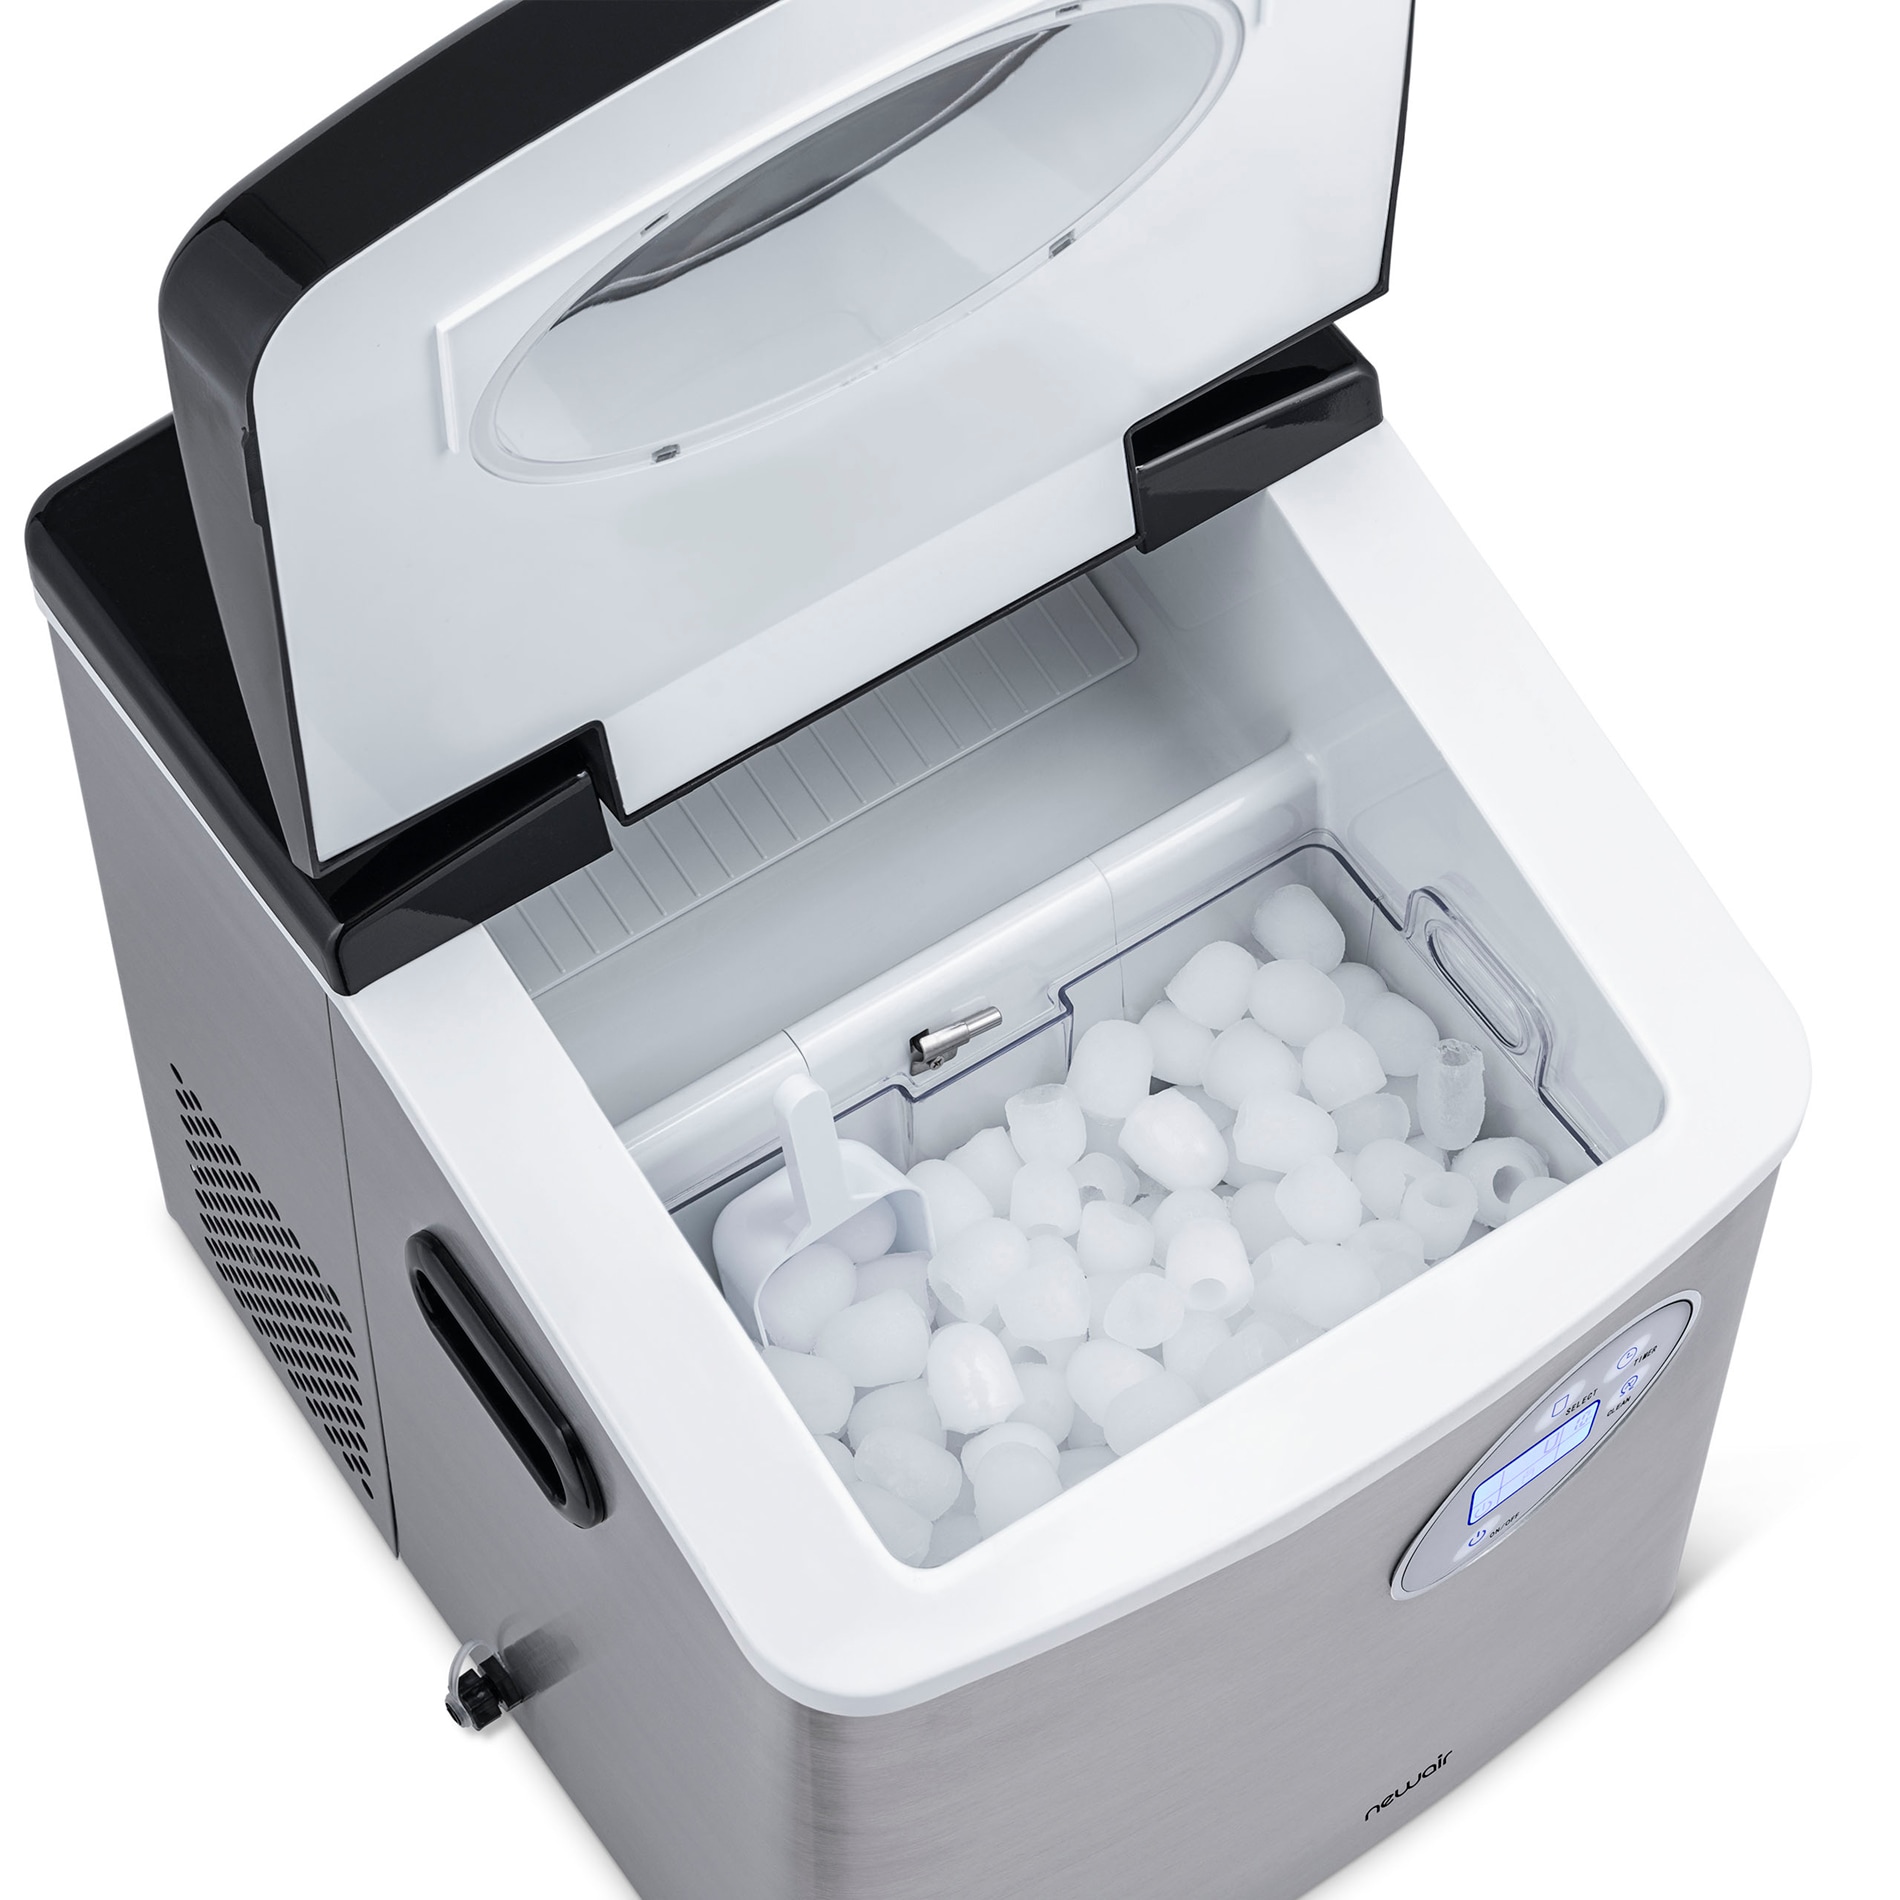 Portable Ice Makers for sale in Idaho Falls, Idaho